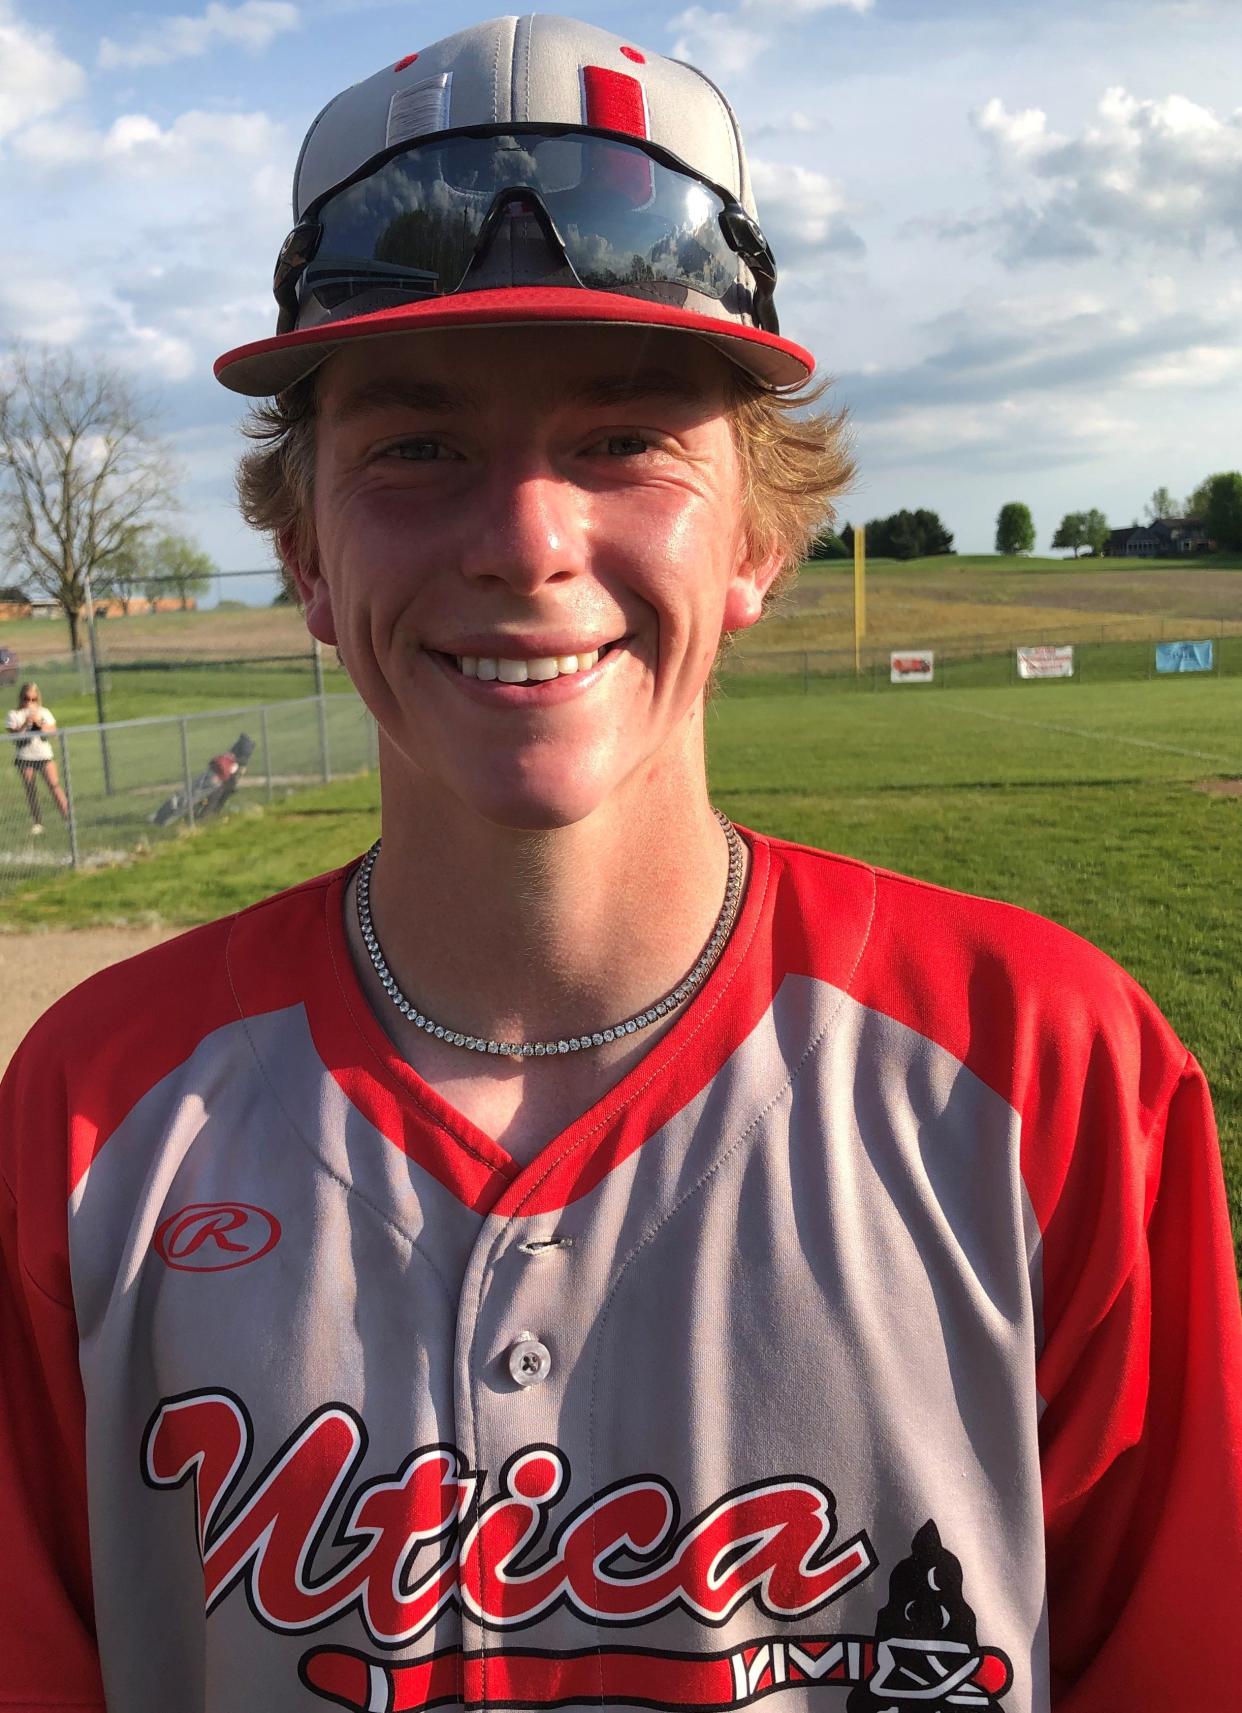 Utica senior Roman Gamble pitched a six-hitter, striking out four with no walks and allowing just one earned run, and also had two hits as the Redskins knocked off LCL-Buckeye leader Licking Valley 5-3 on the road Wednesday.